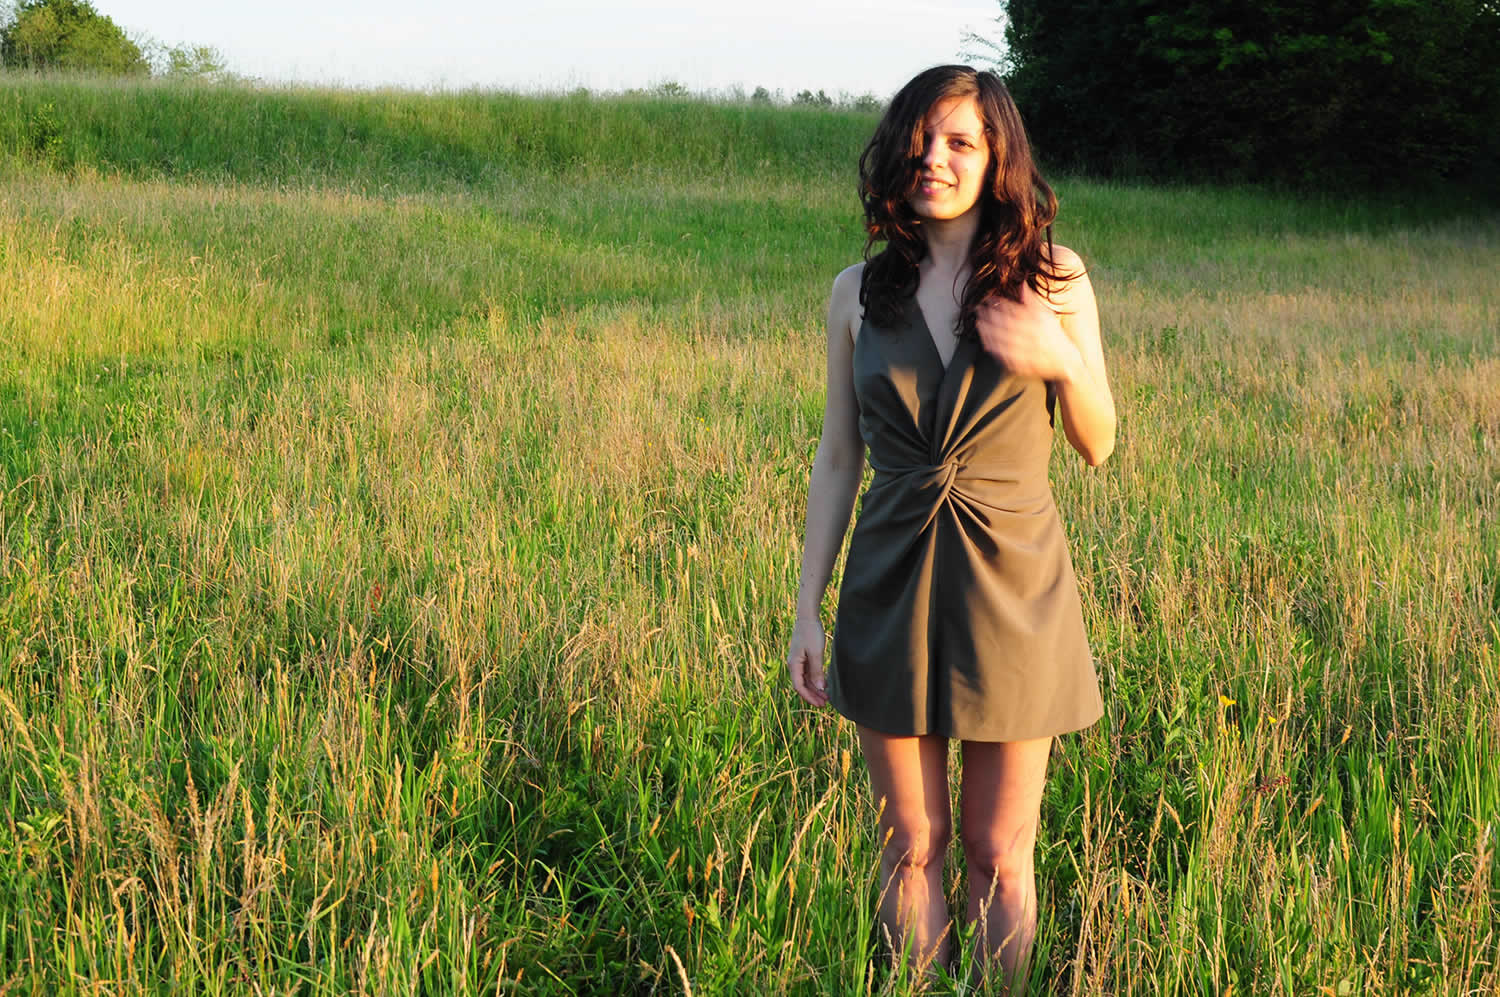 ladulsatina Sewing and DIY fashion blog: leather jacket and playsuit - army green playsuit with central draping